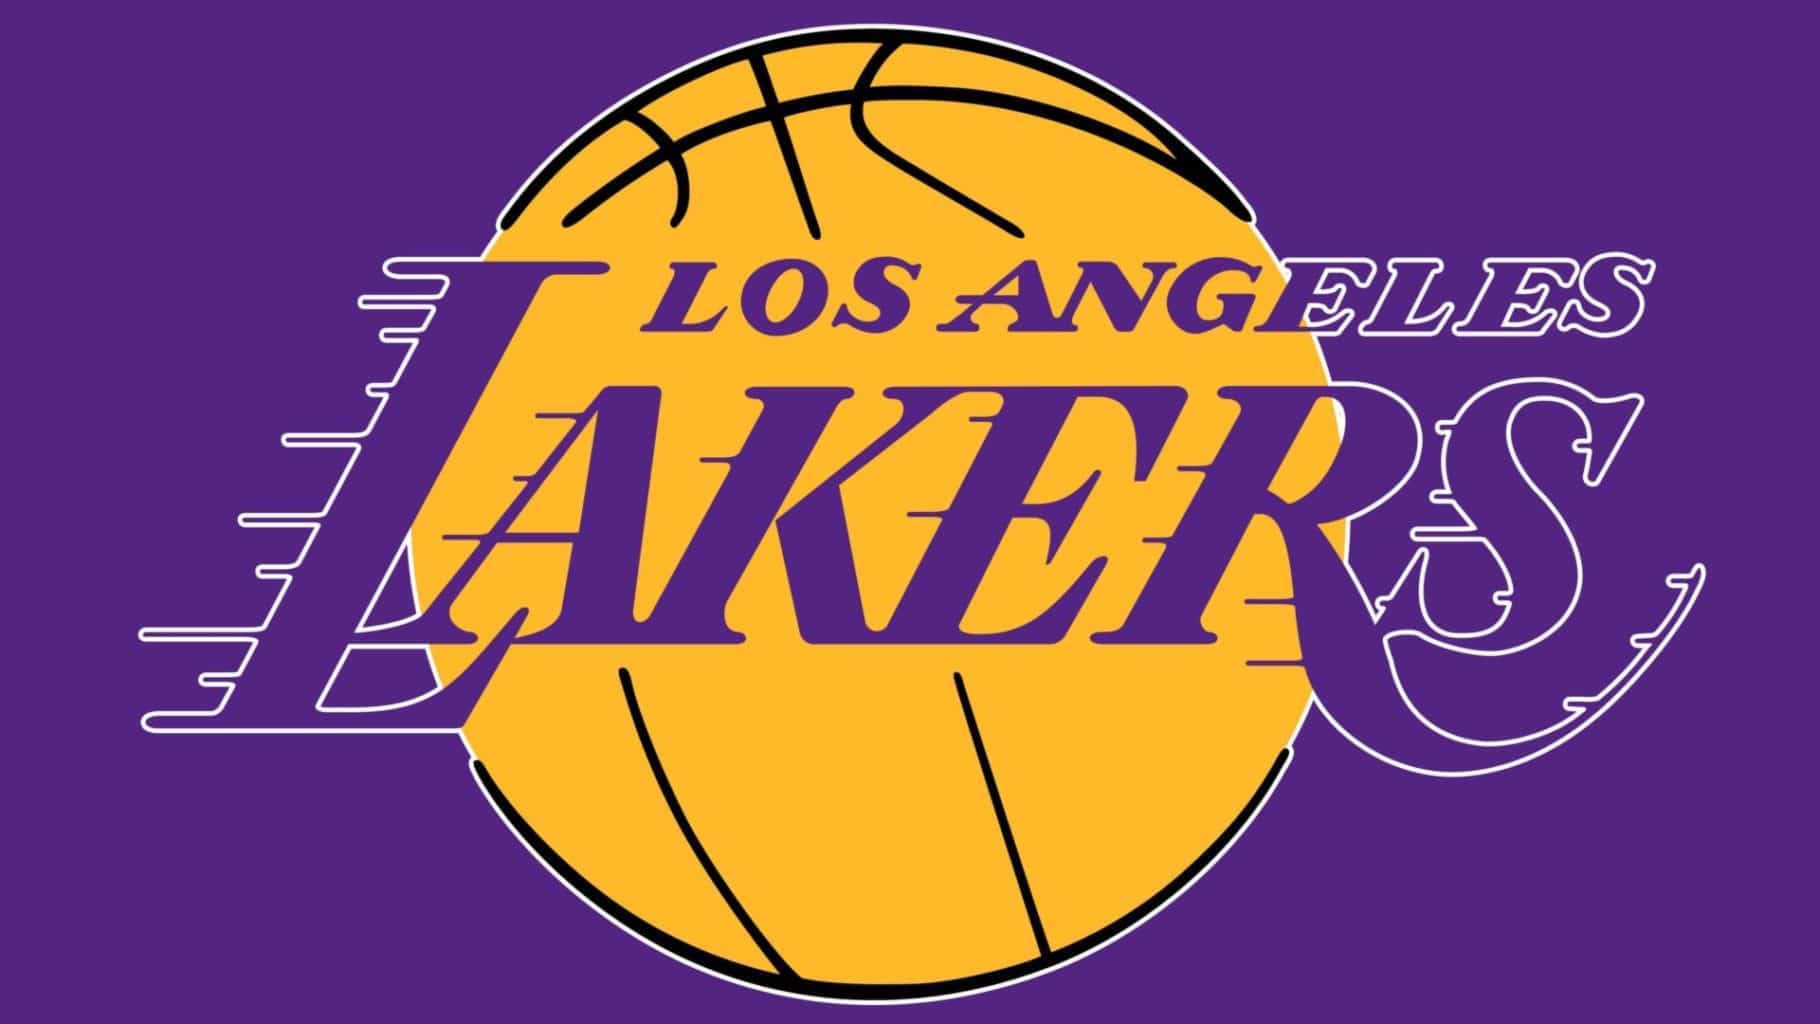 Three Lakers to Watch